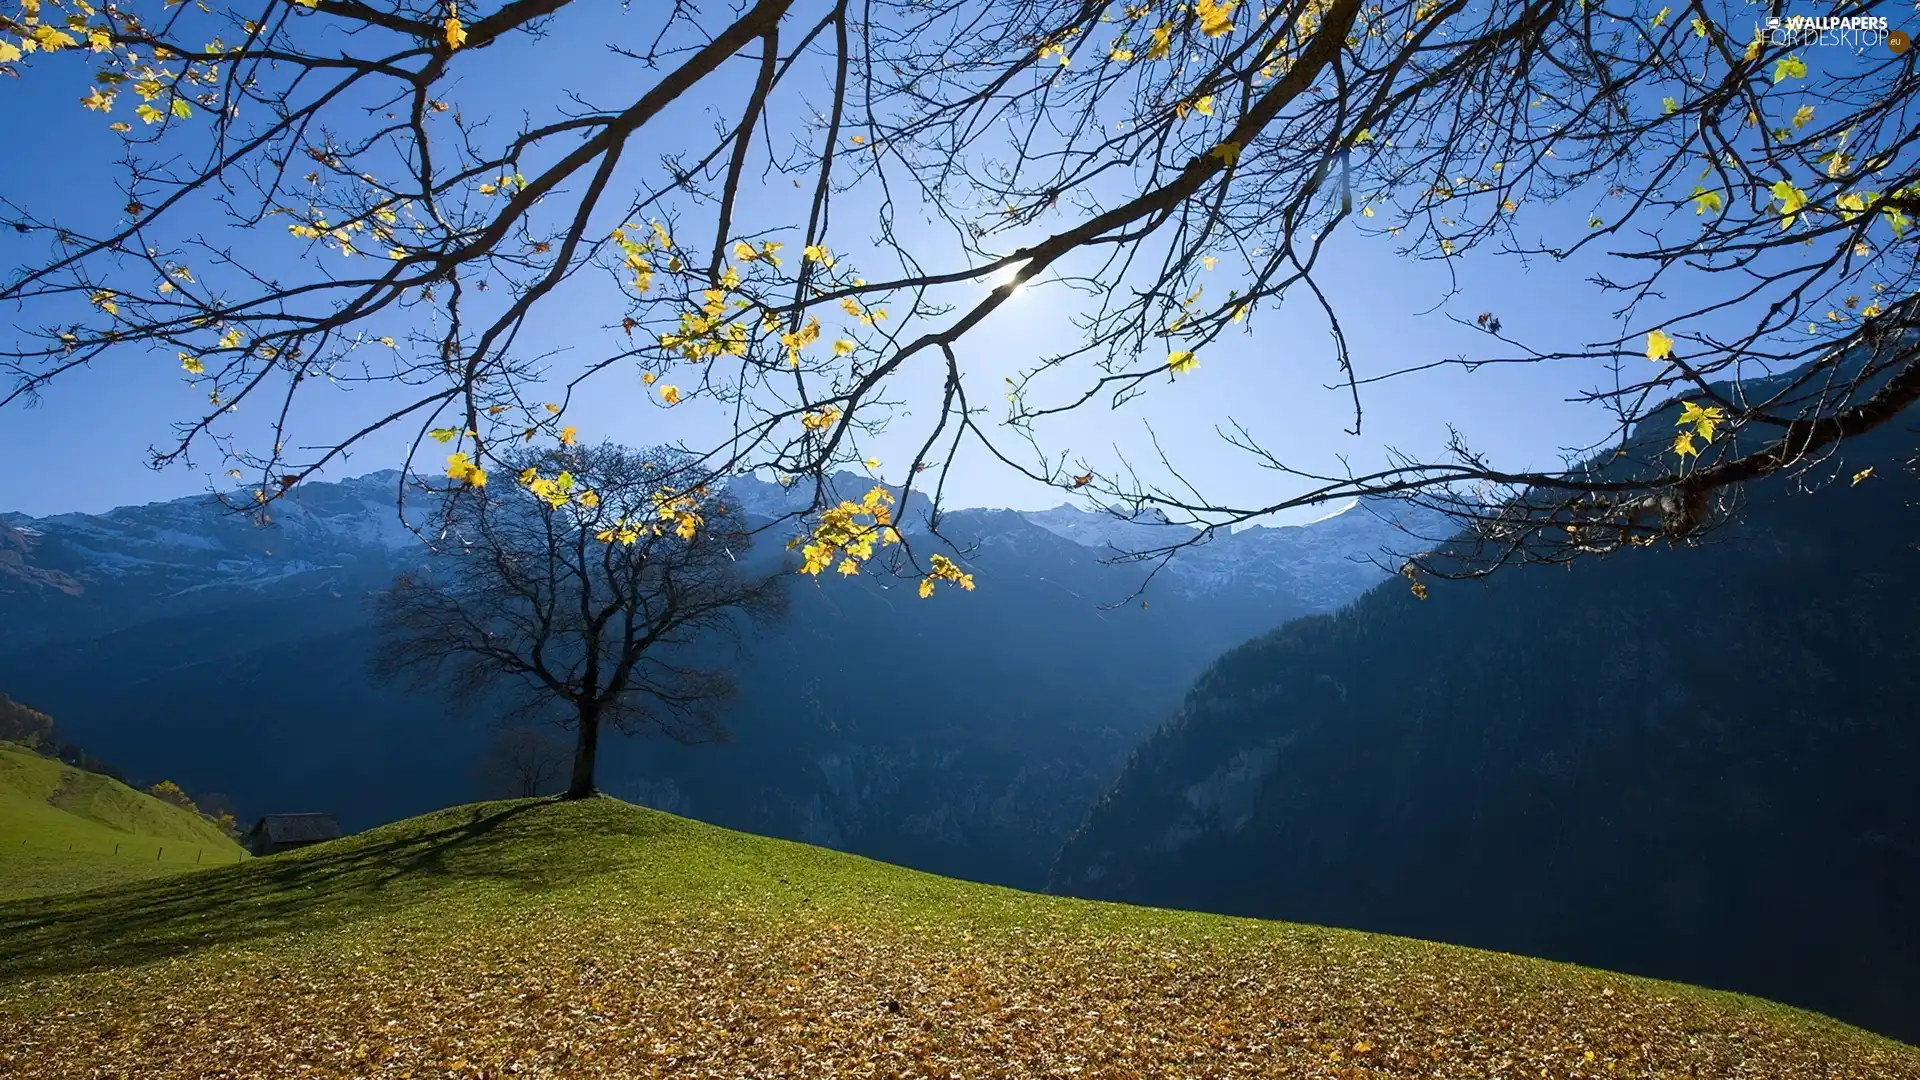 trees, autumn, branch pics, hill, Mountains